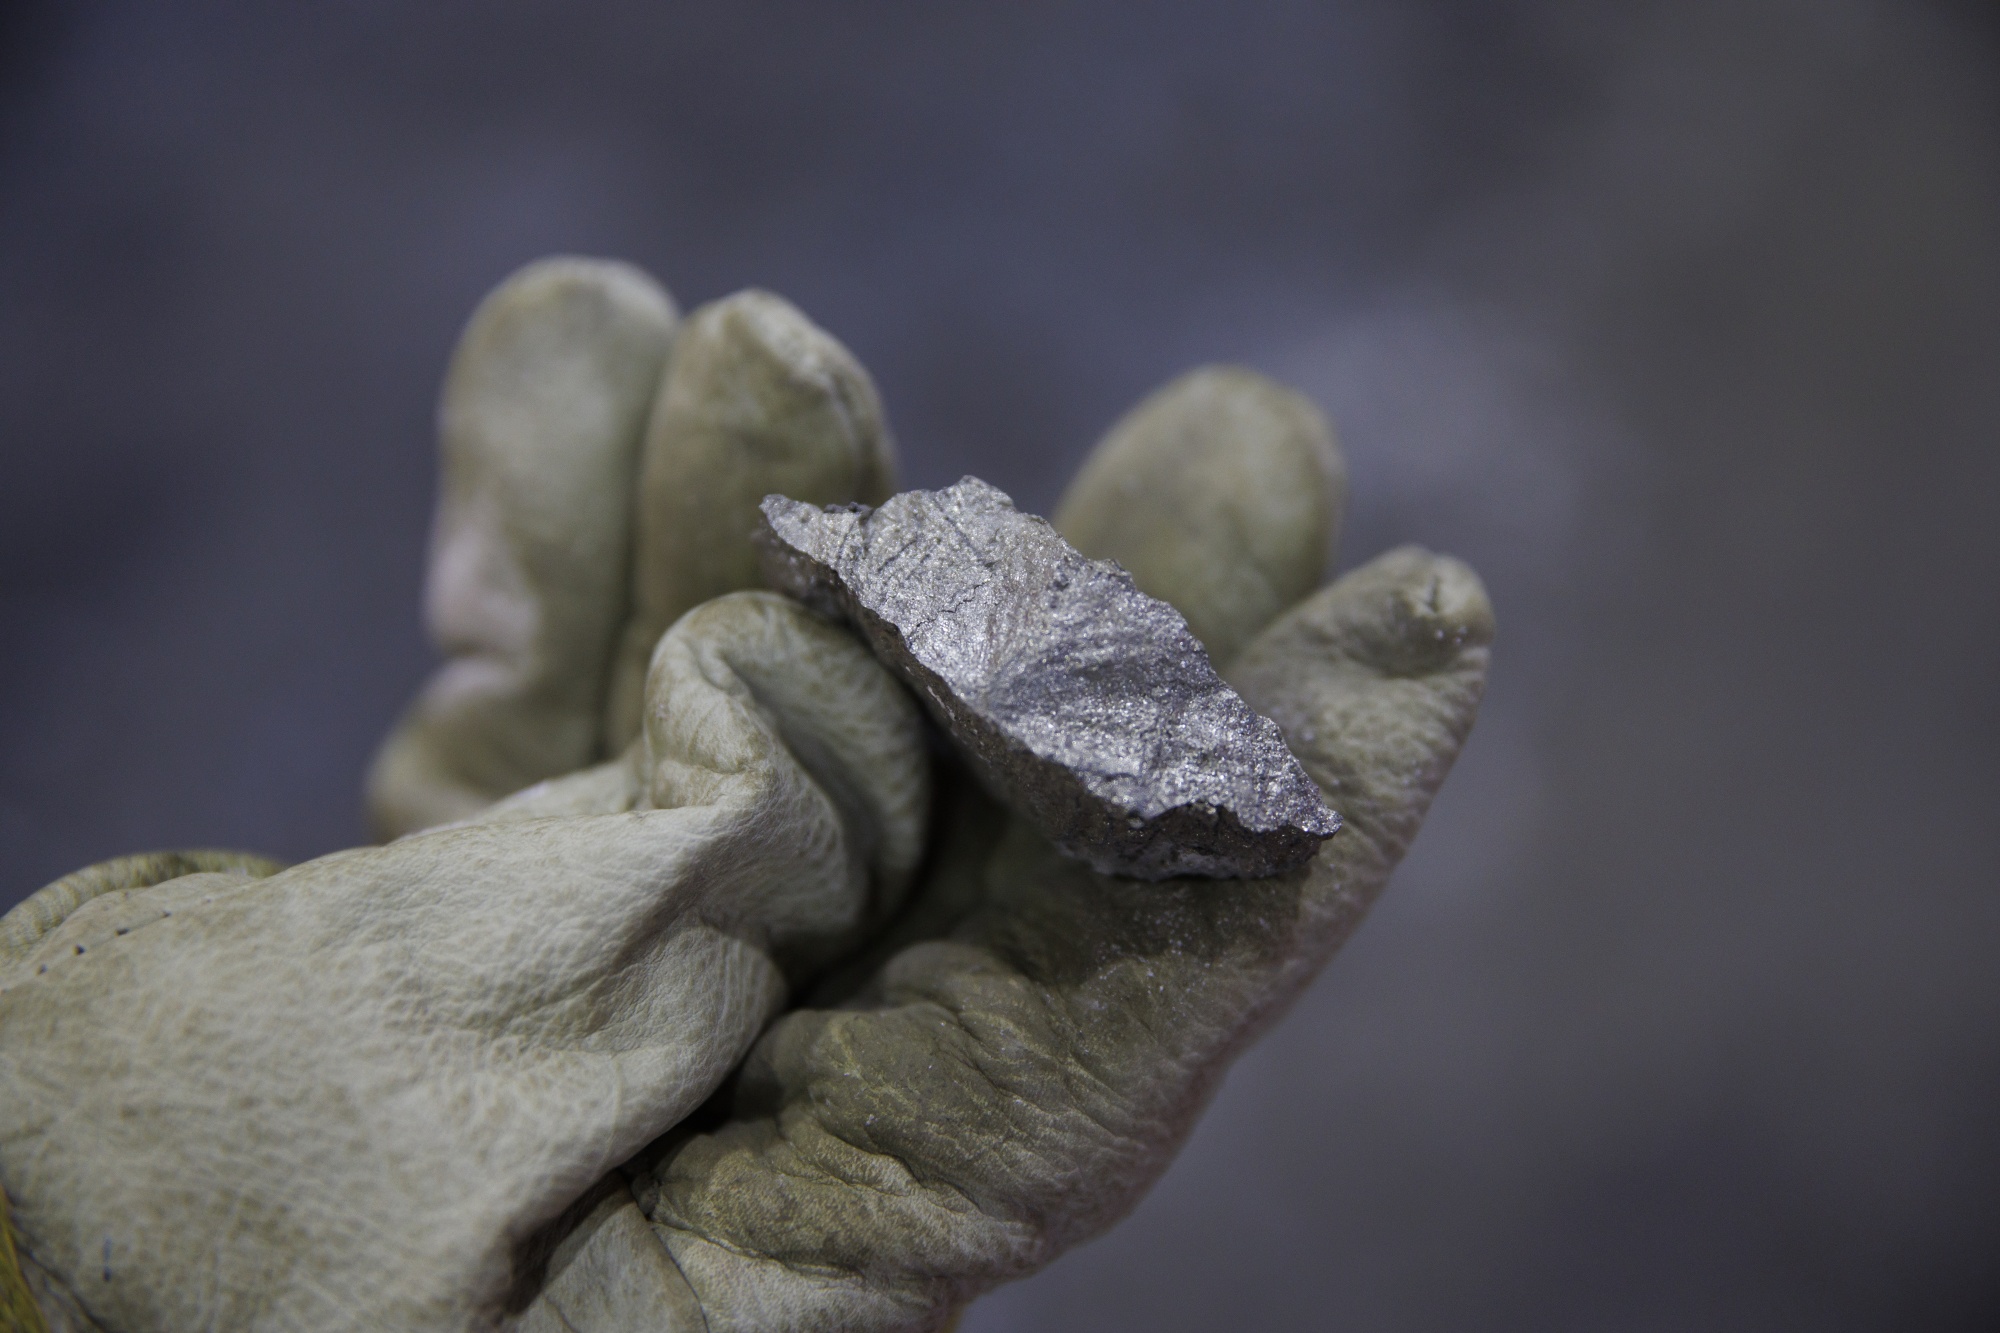 Canada produces more than 60 minerals and metals, has more than 200 mines.